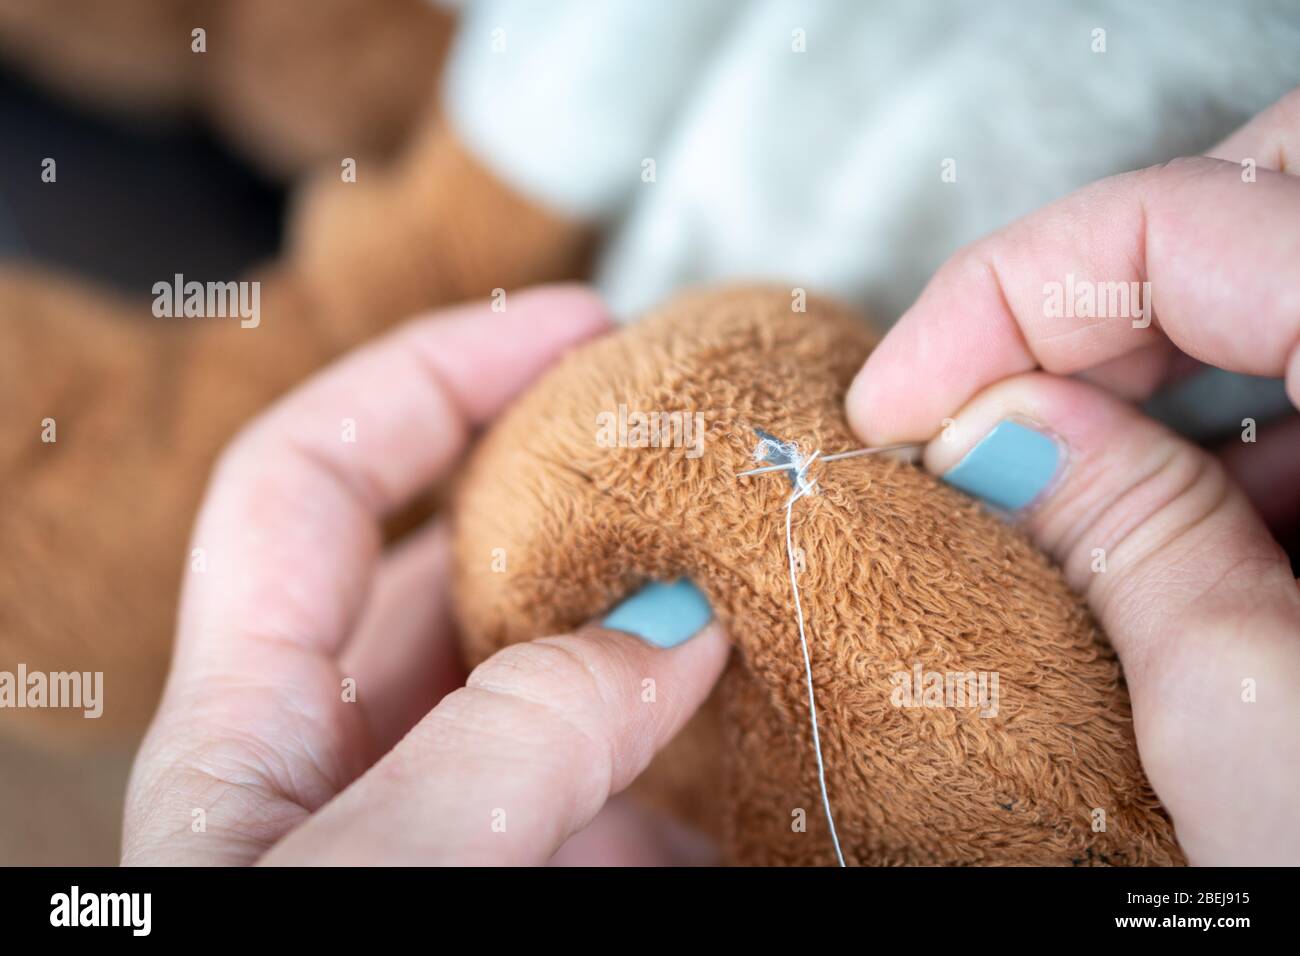 Female hand with blue nail polish sewing a ripped and dirty teddy bear Stock Photo